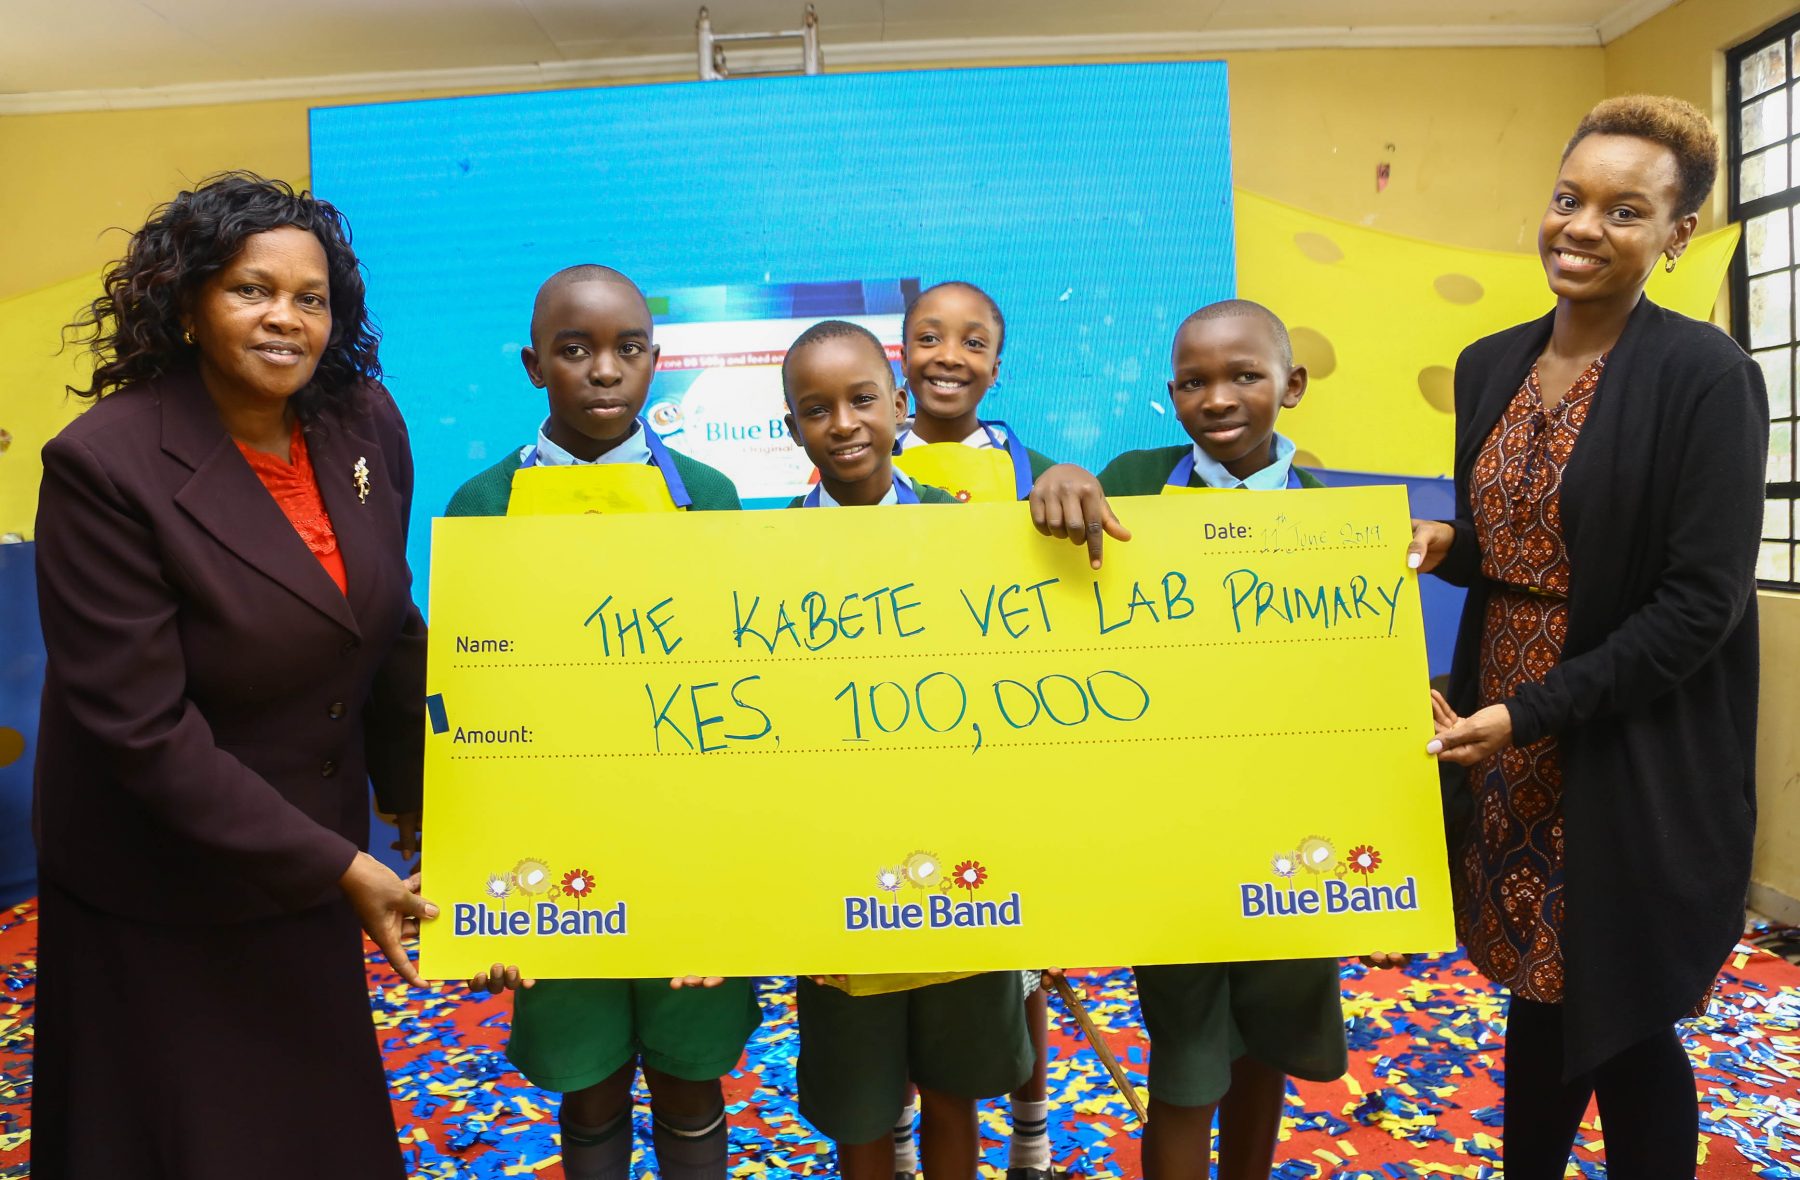 From left: Hellen Mugo, Head Teacher Kabete Vet lab primary School together with the students of Vet lab Primary School receive a dummy cheque worth Ksh. 100,000 from Jacky Mungai, Upfield Head of Marketing East and Southern Region during the launch of Blue Band Good Breakfast and Social Mission Campaign at Kabete Vet Lab Primary School.